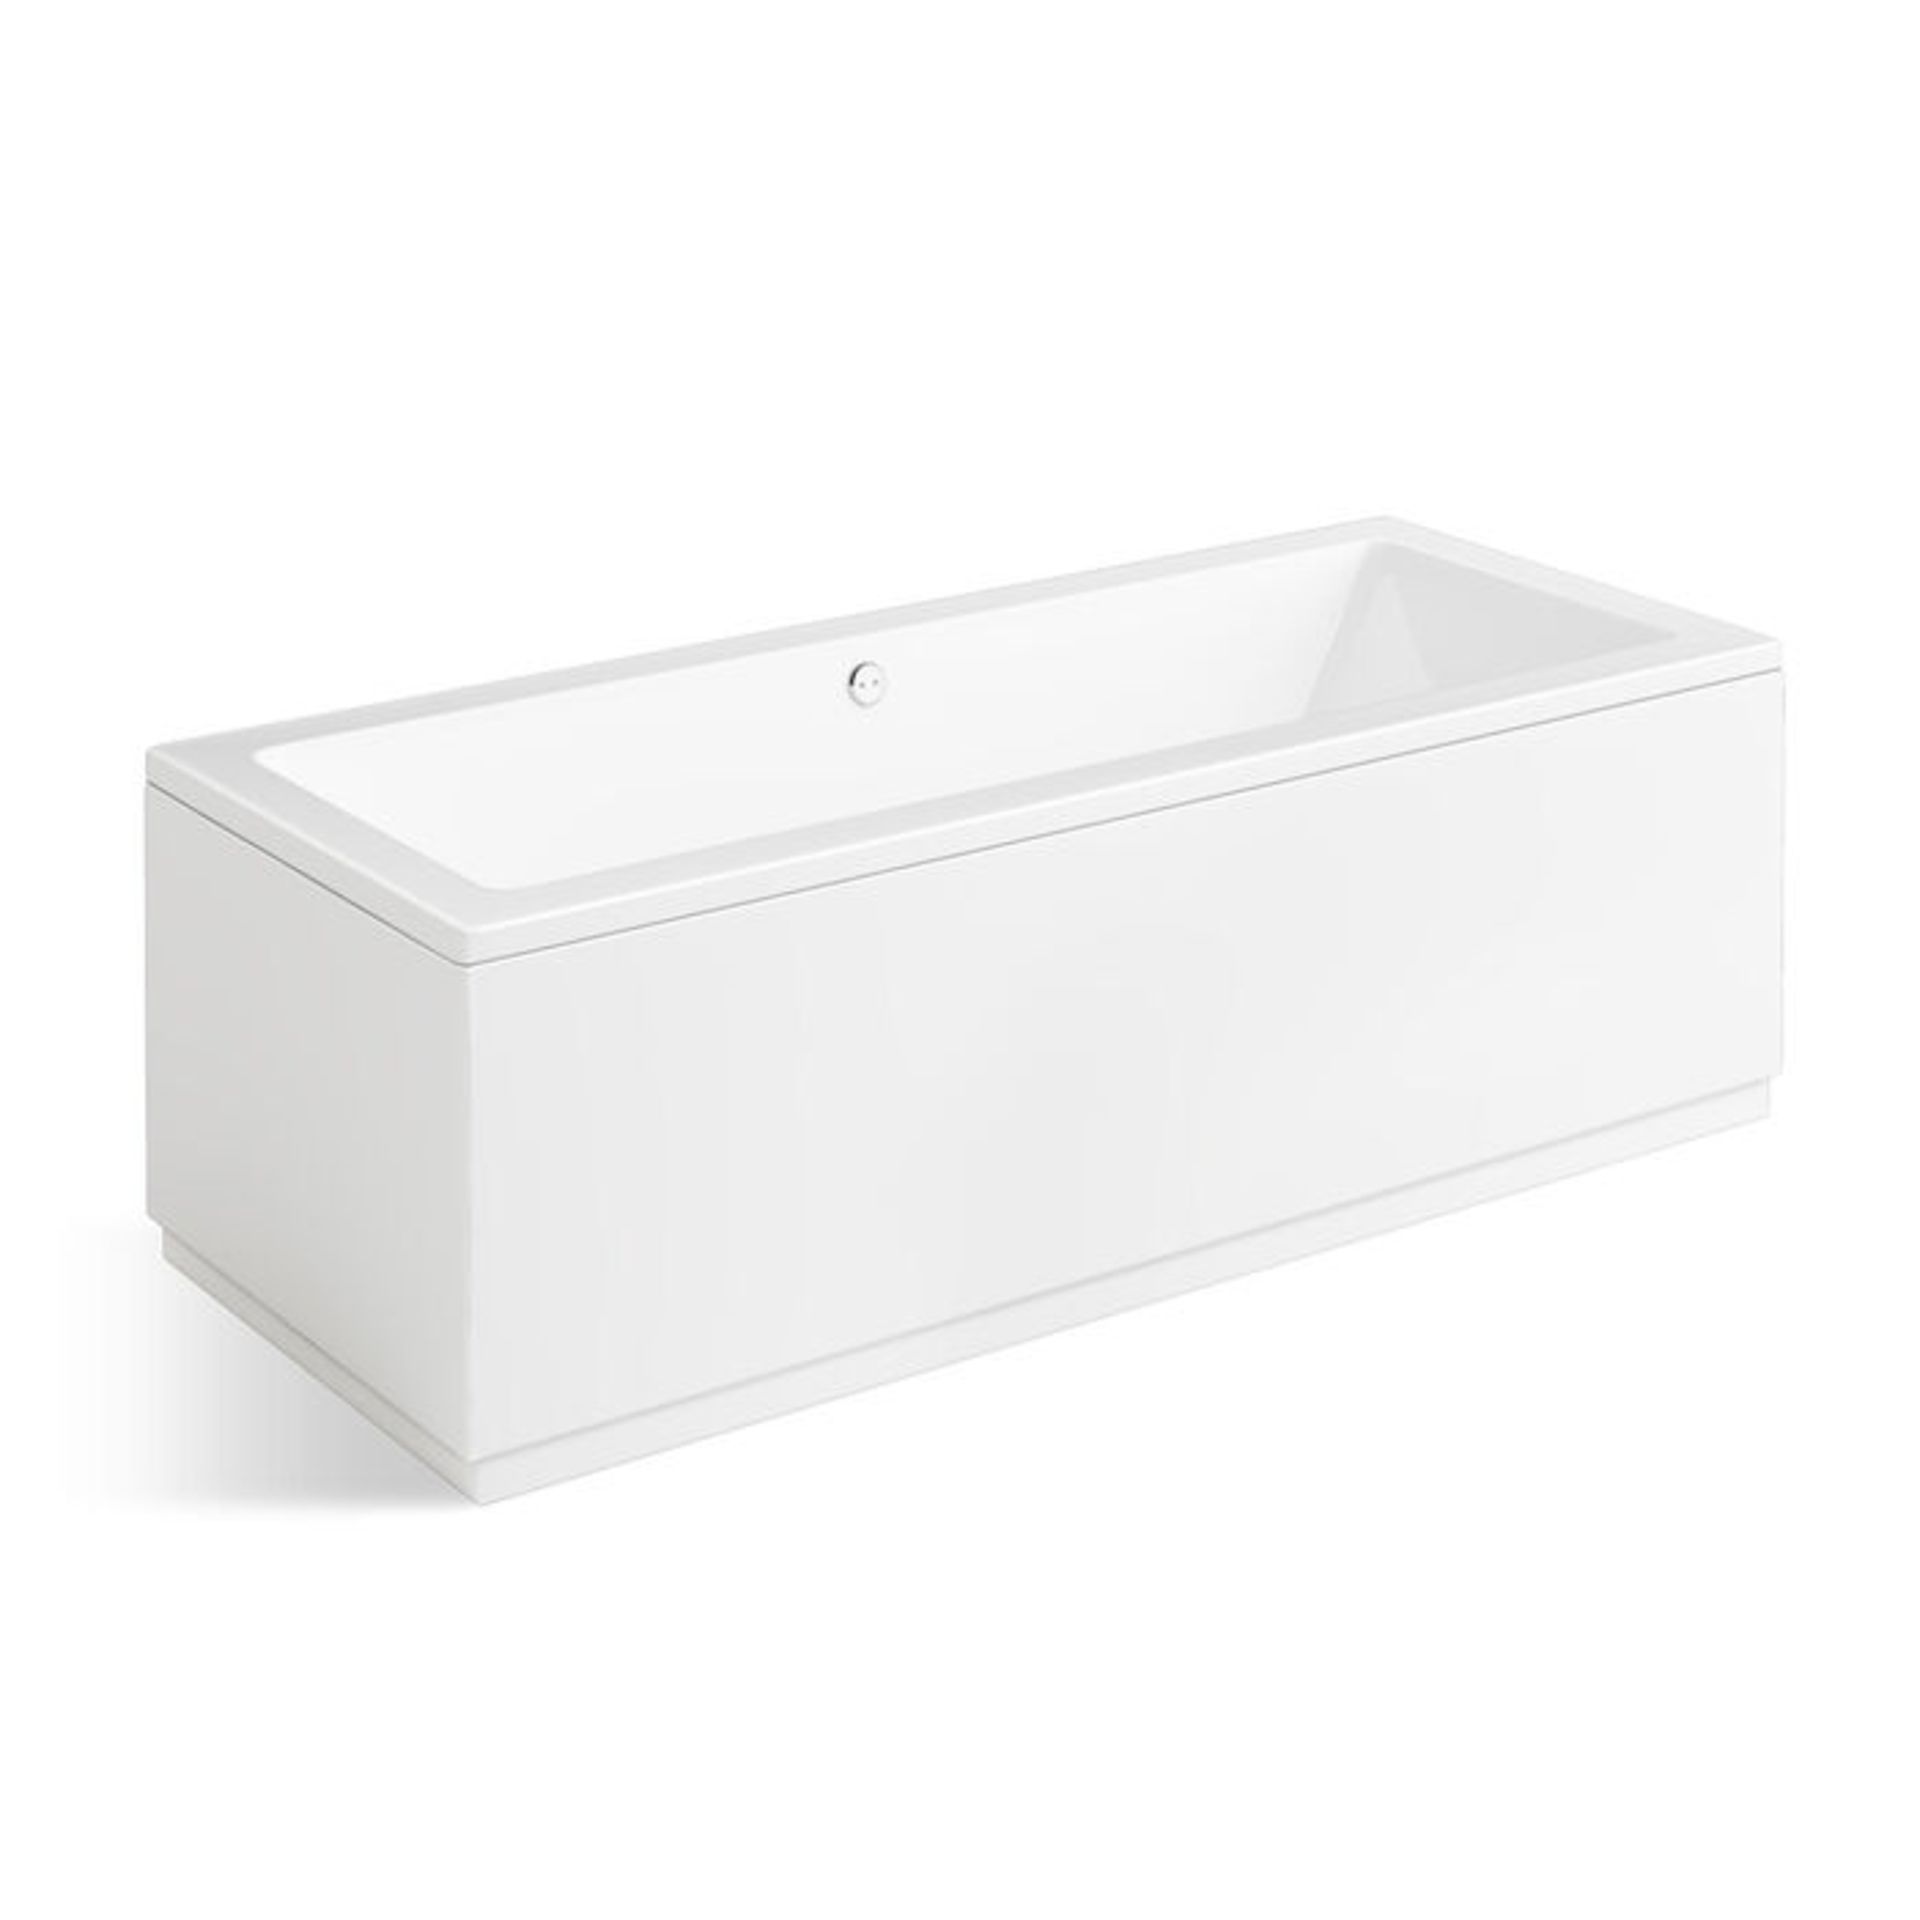 (PC100) 1800x800mm Built-in bath Double sided Rectangular. RRP £589.99 Made in the UK. reinfor...( - Image 2 of 3